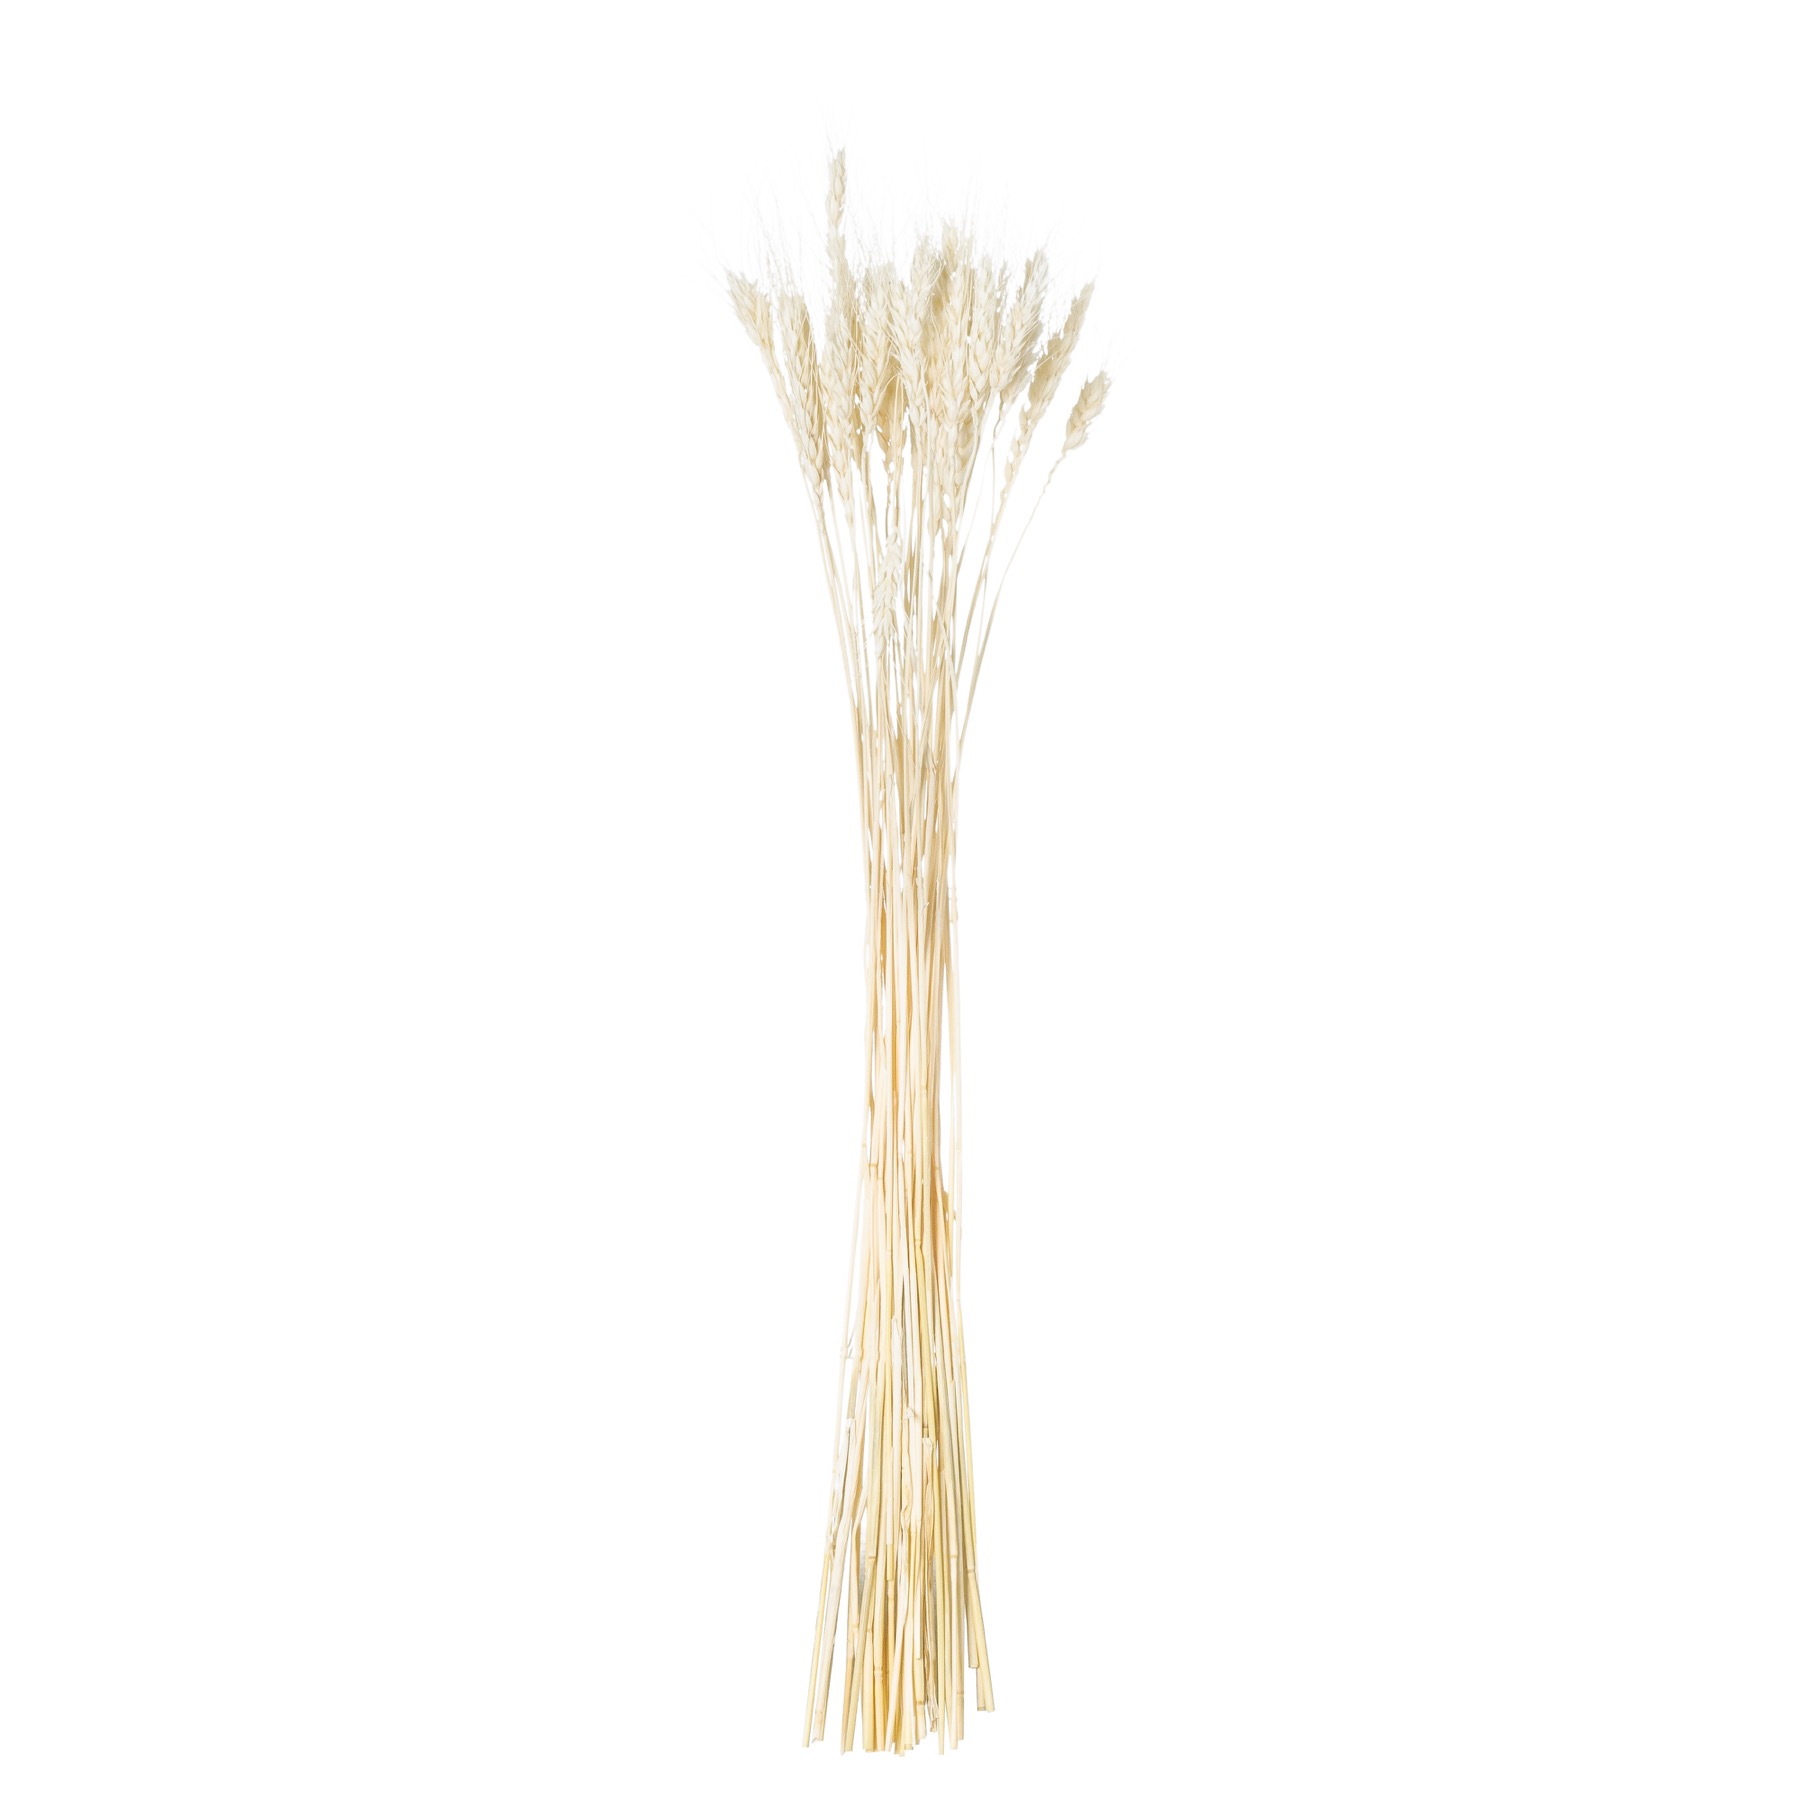 Dried White Wheat Bunch Of 20 - Image 2